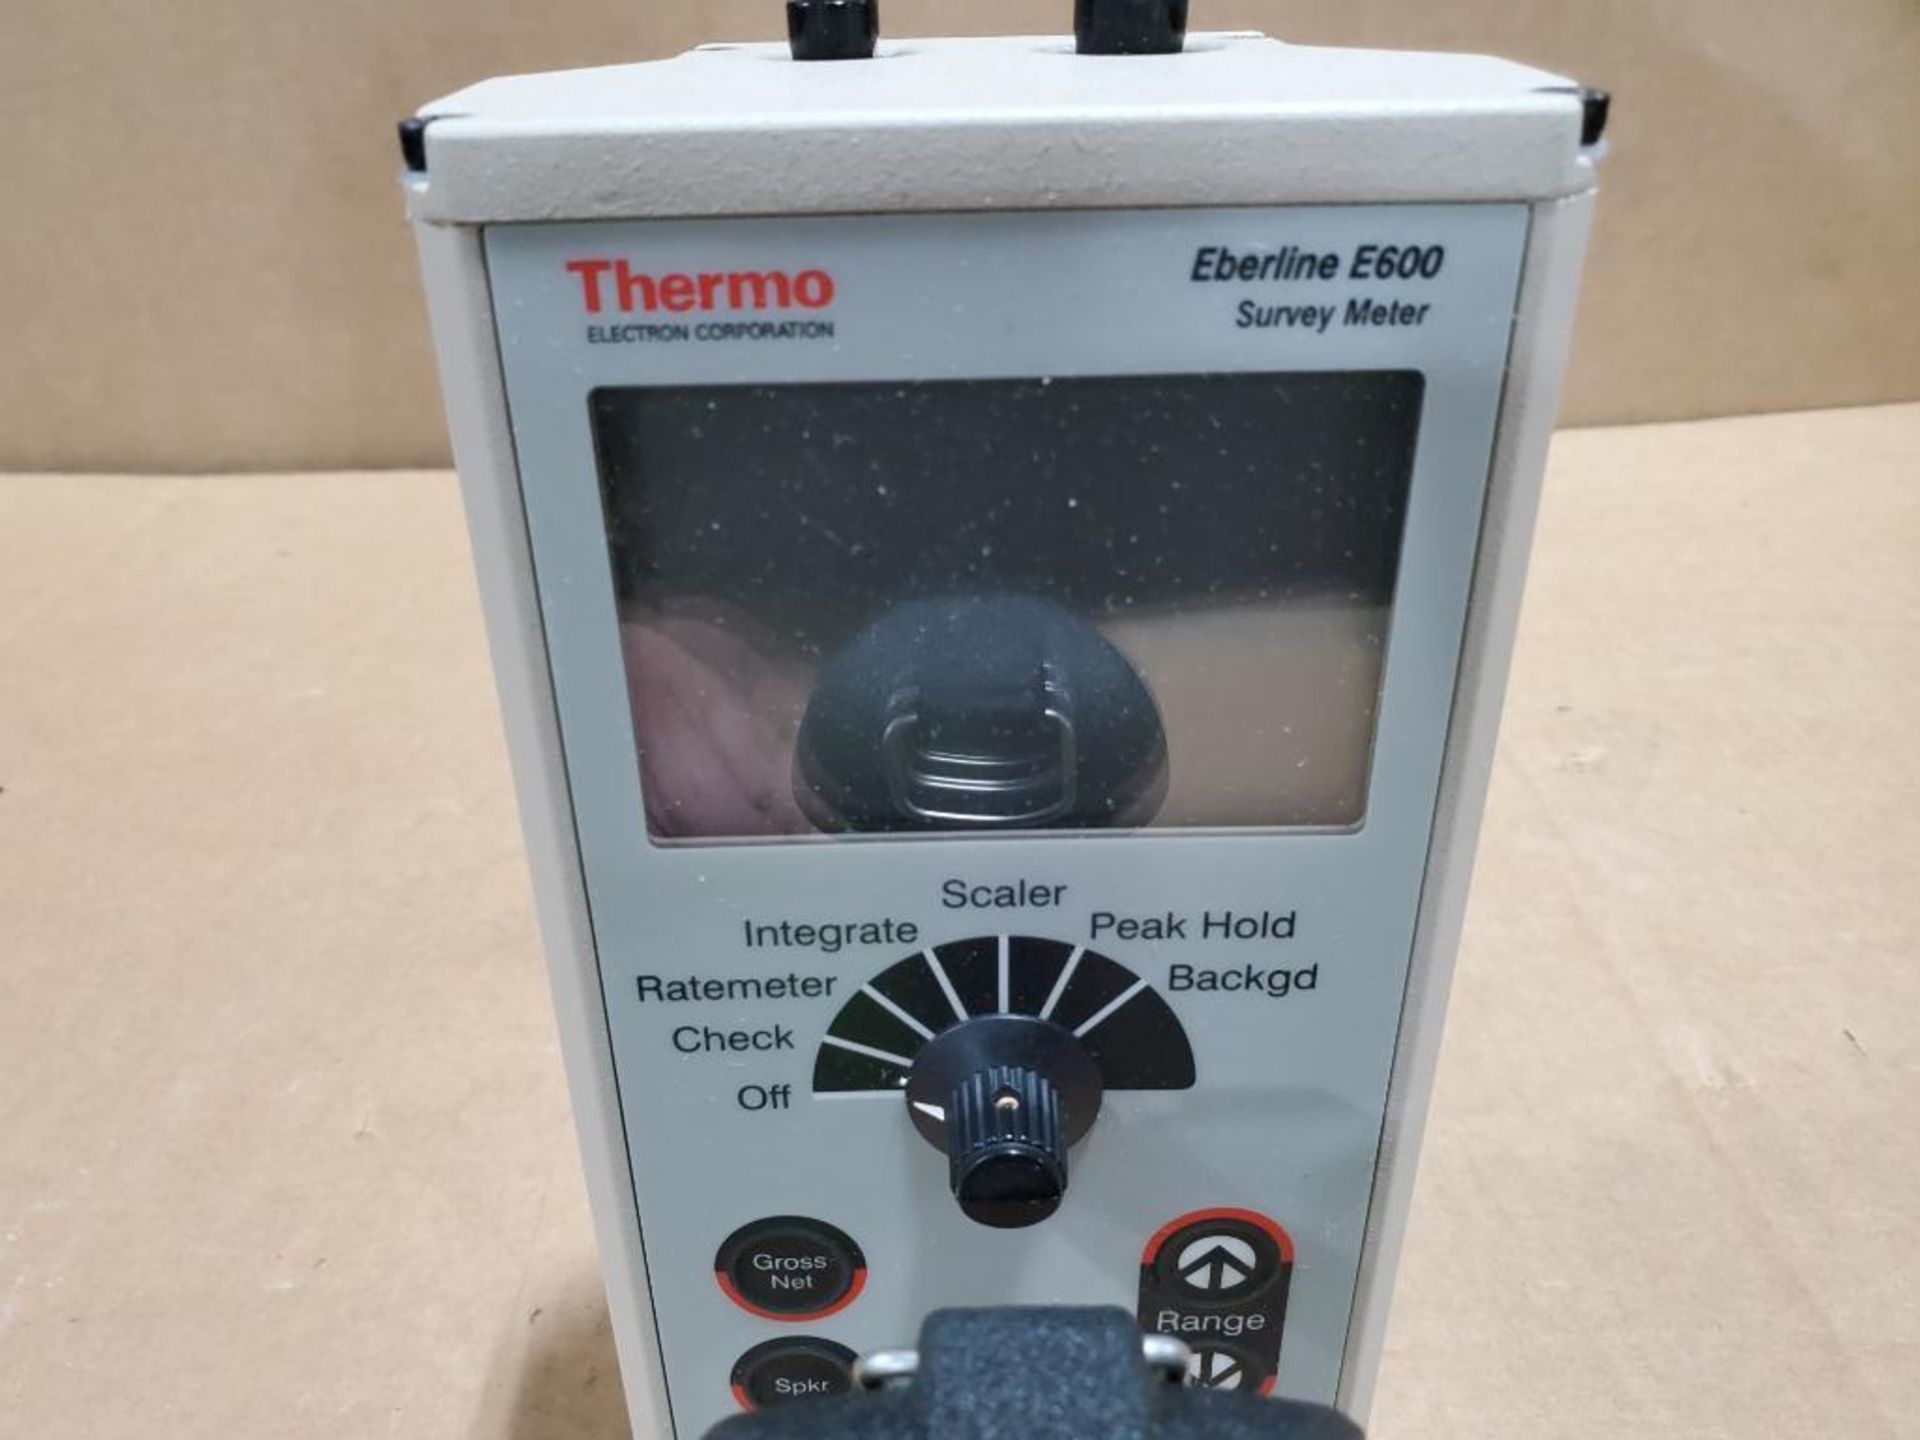 Thermo Electron Corporation geiger counter survey meter. Model Eberline E600. - Image 2 of 7